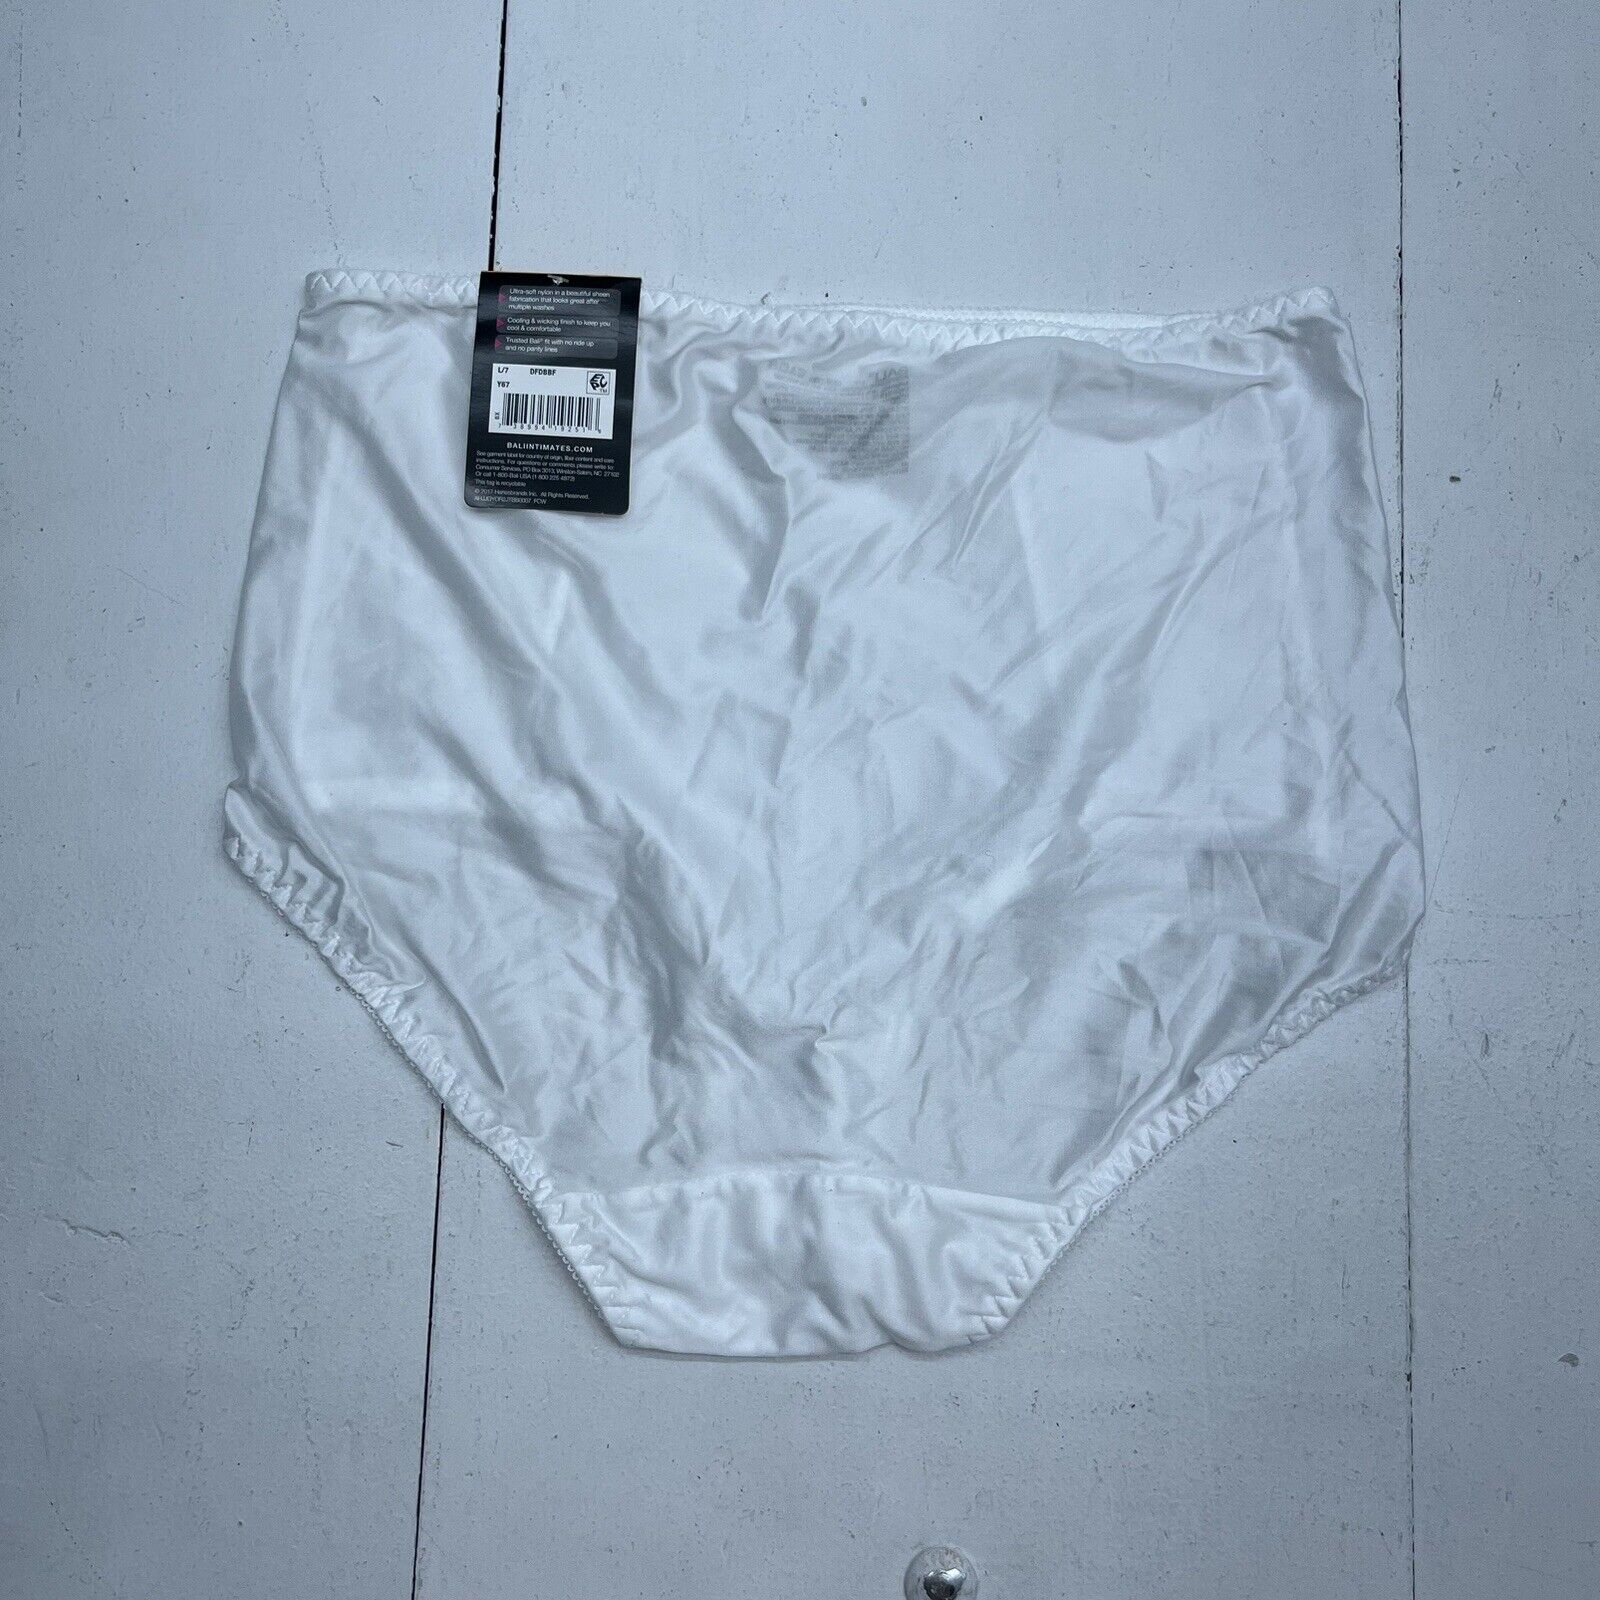 Bali White Lace Double Support Briefs Women's Size Large NEW